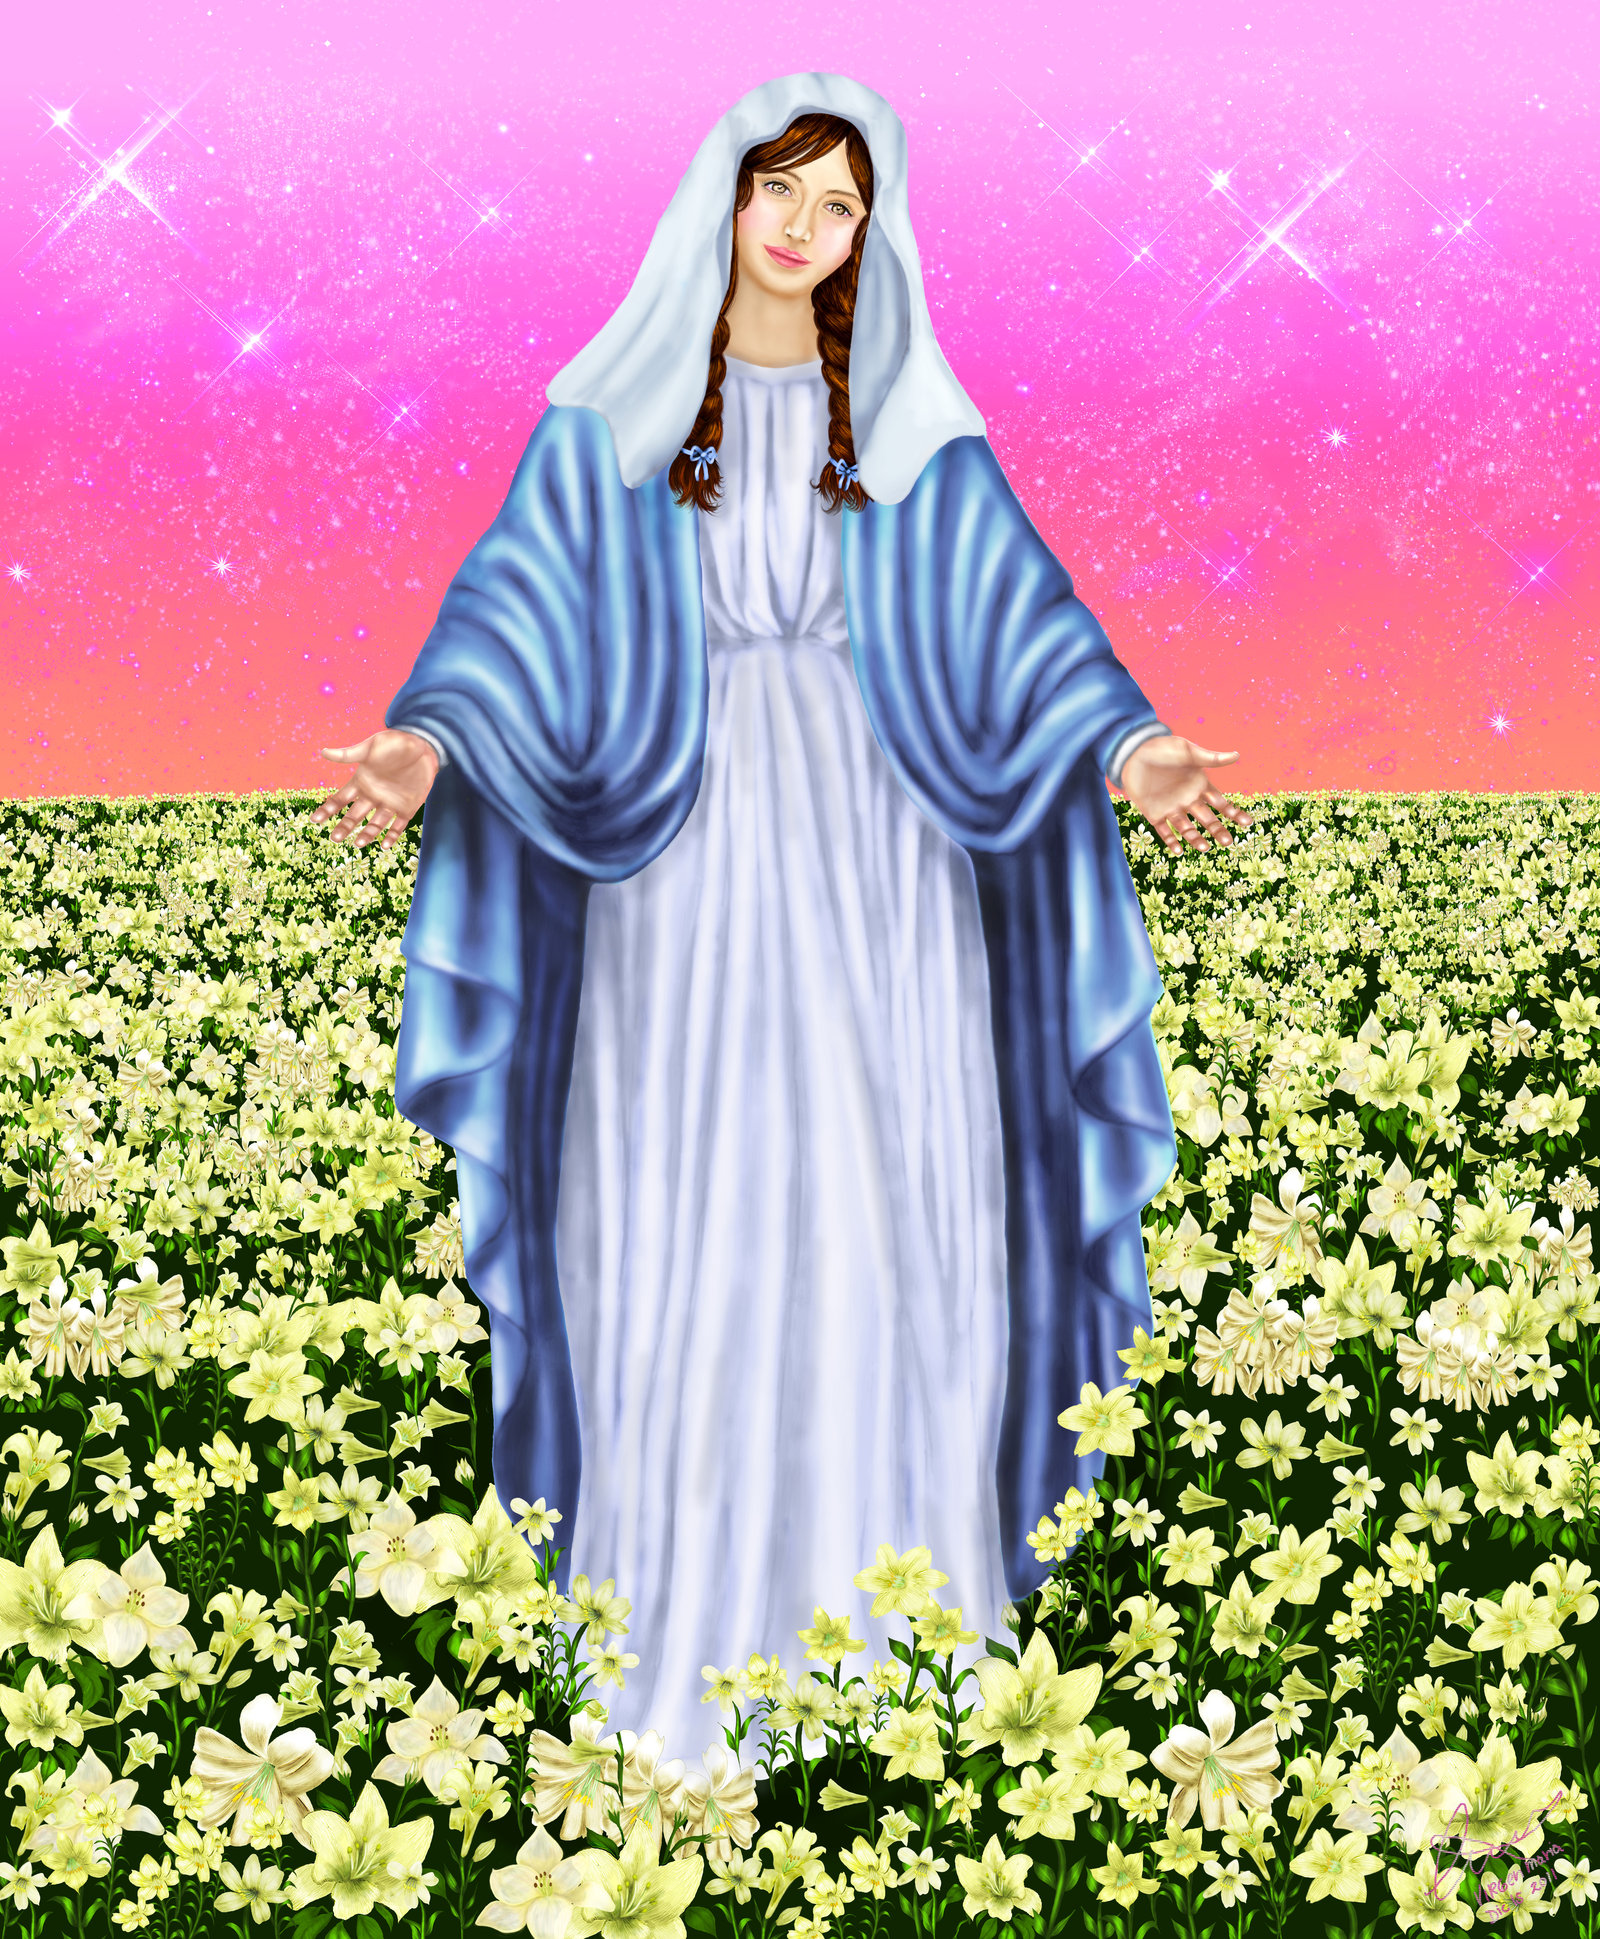 Mexican Virgin Mary Art Virgen Maria By